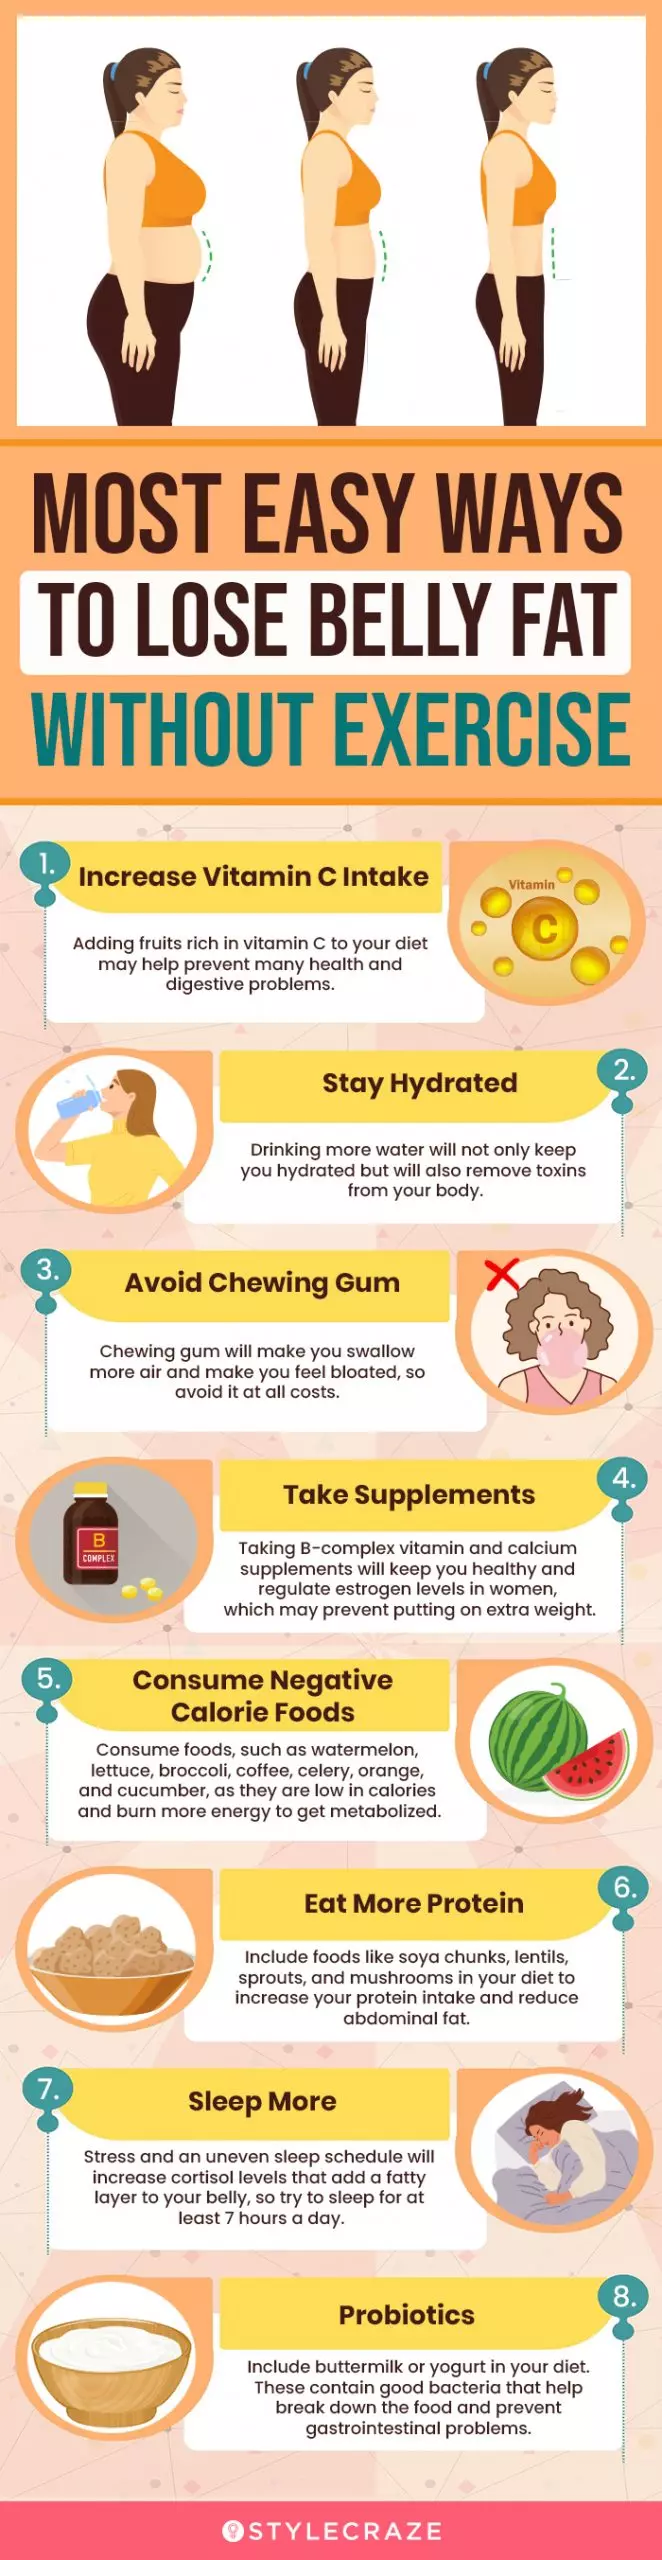 most easy ways to lose belly fat without excercise (infographic)